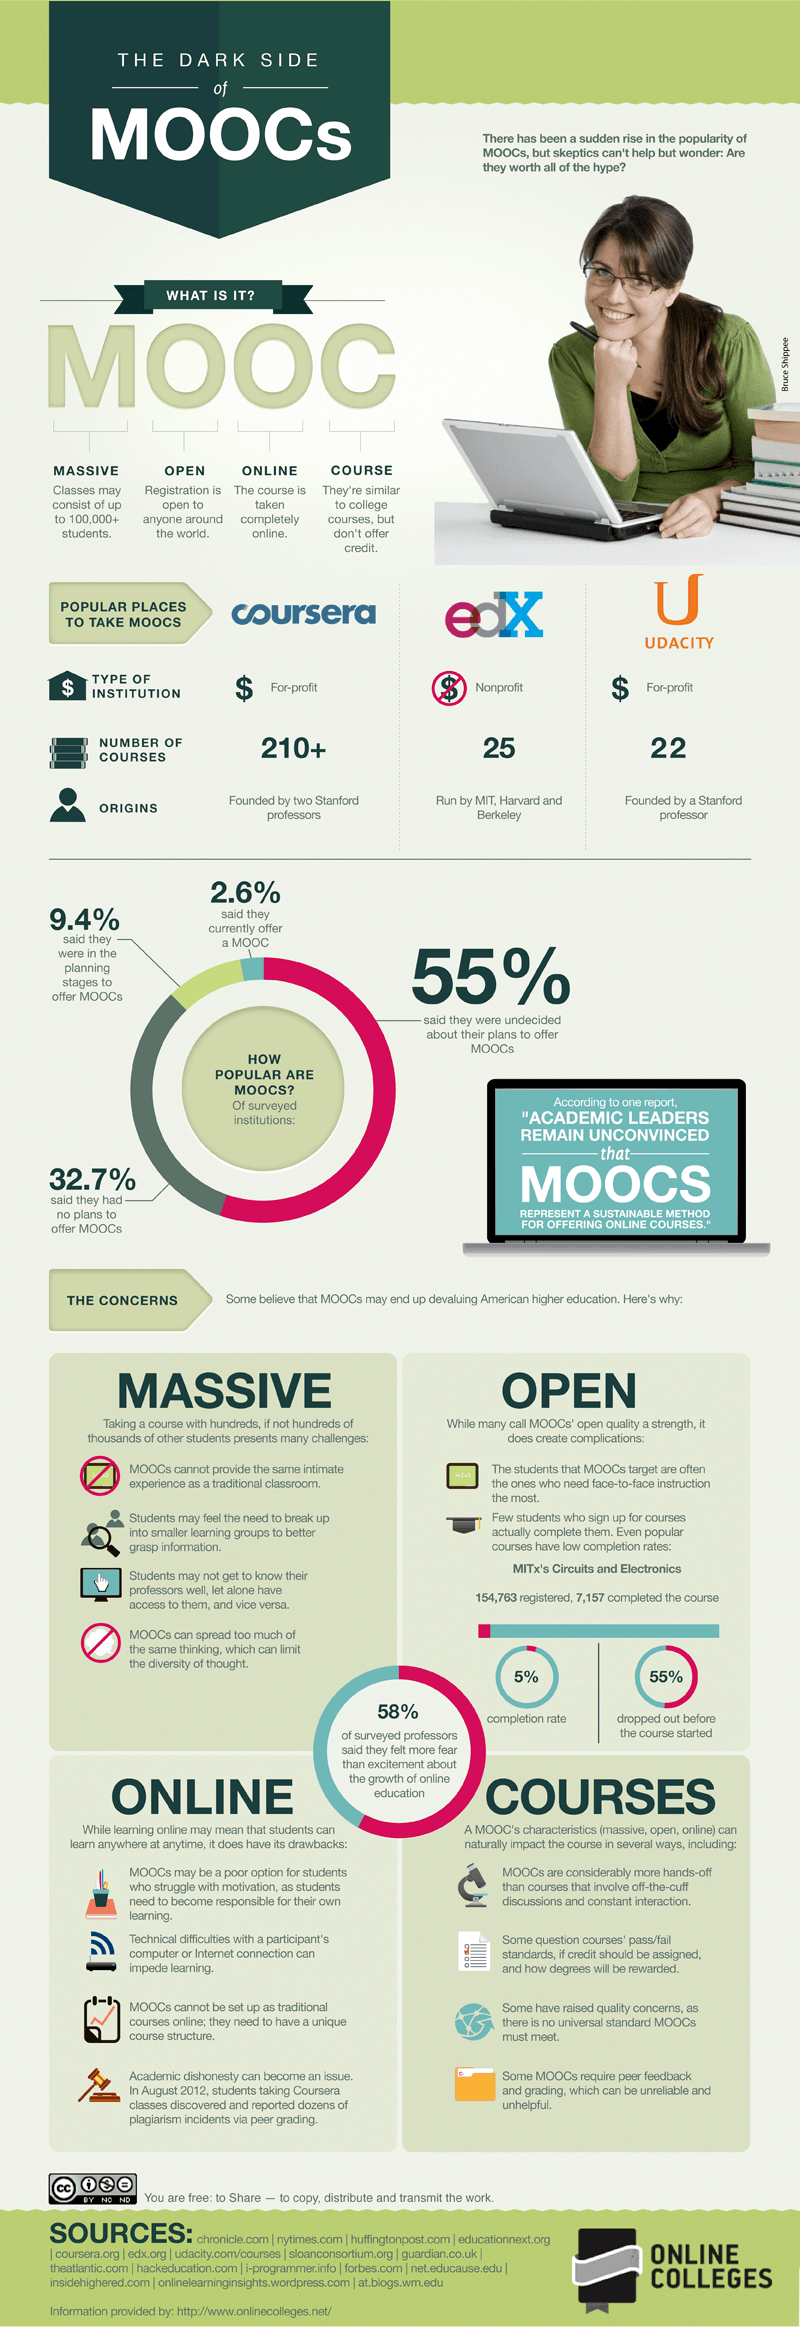 Exploring the Dark Side of MOOCs Infographic